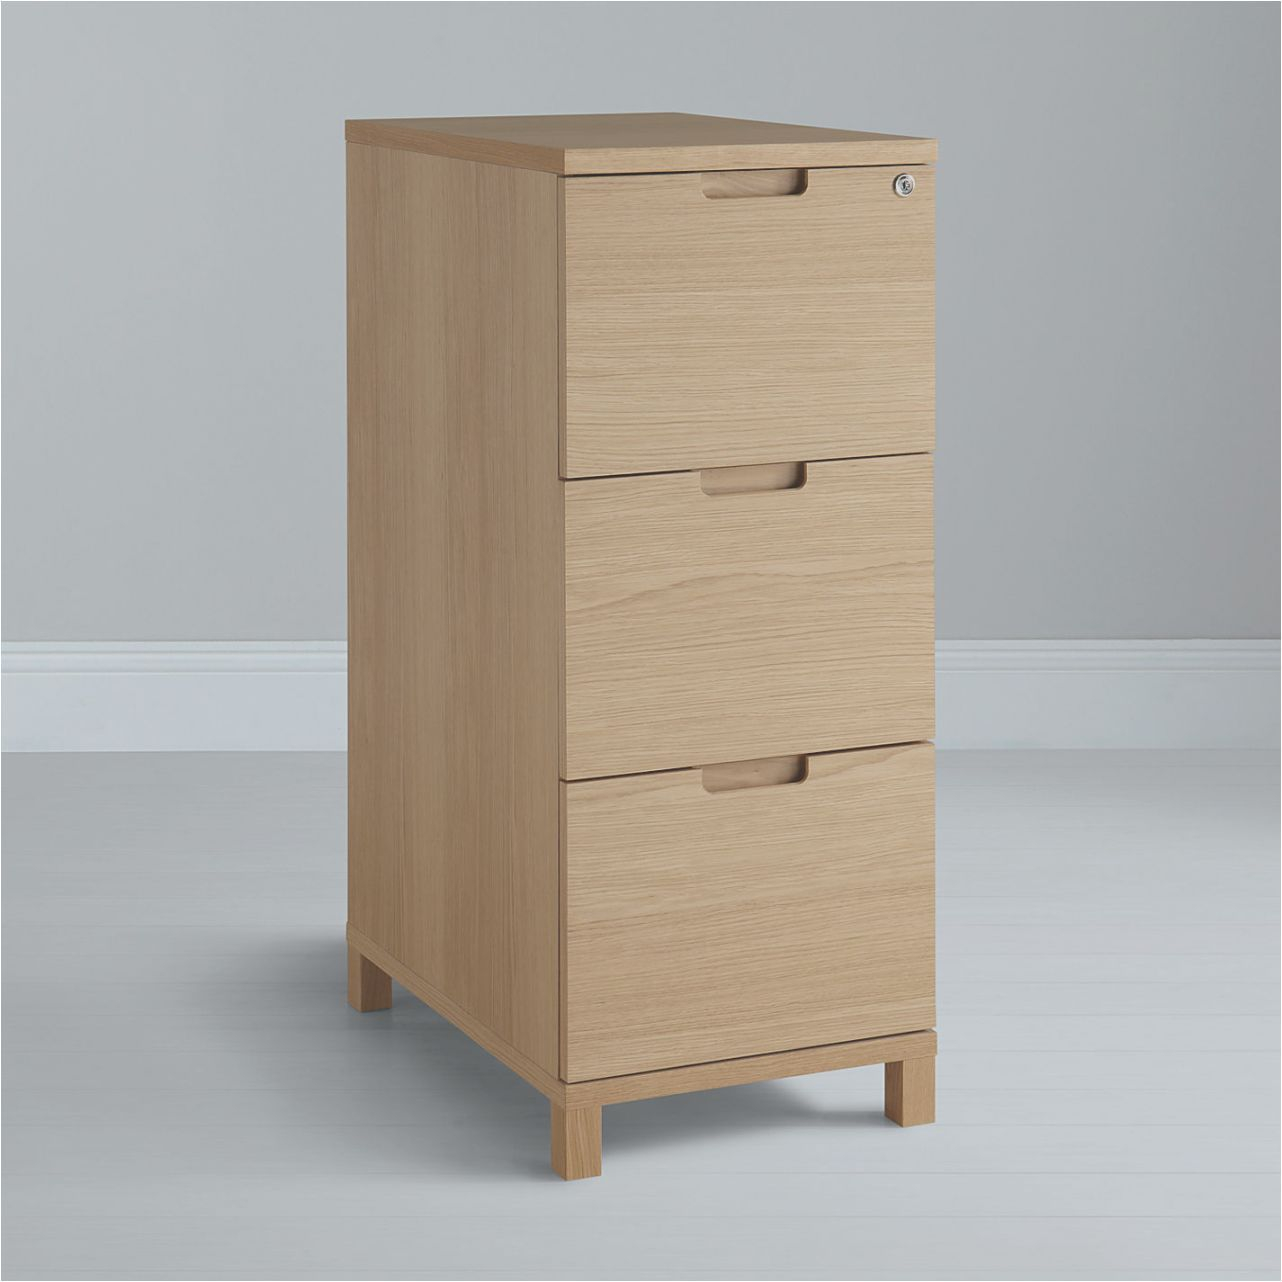 50 Unique Two Drawer Wood Filing Cabinets Atmosphere Two Drawer pertaining to size 1282 X 1282